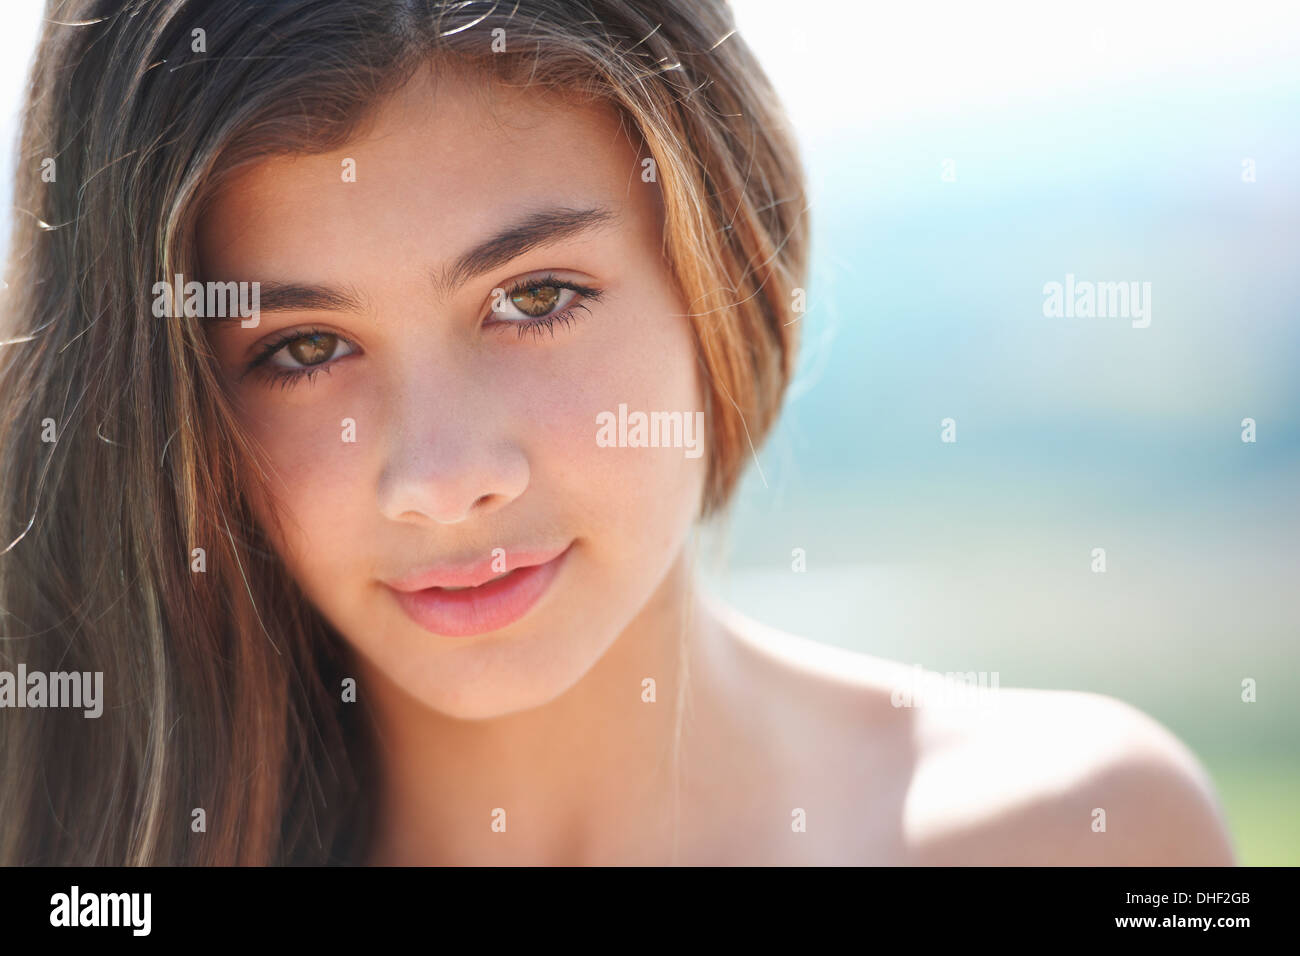 Portrait of brunette teenage girl looking at camera Stock Photo